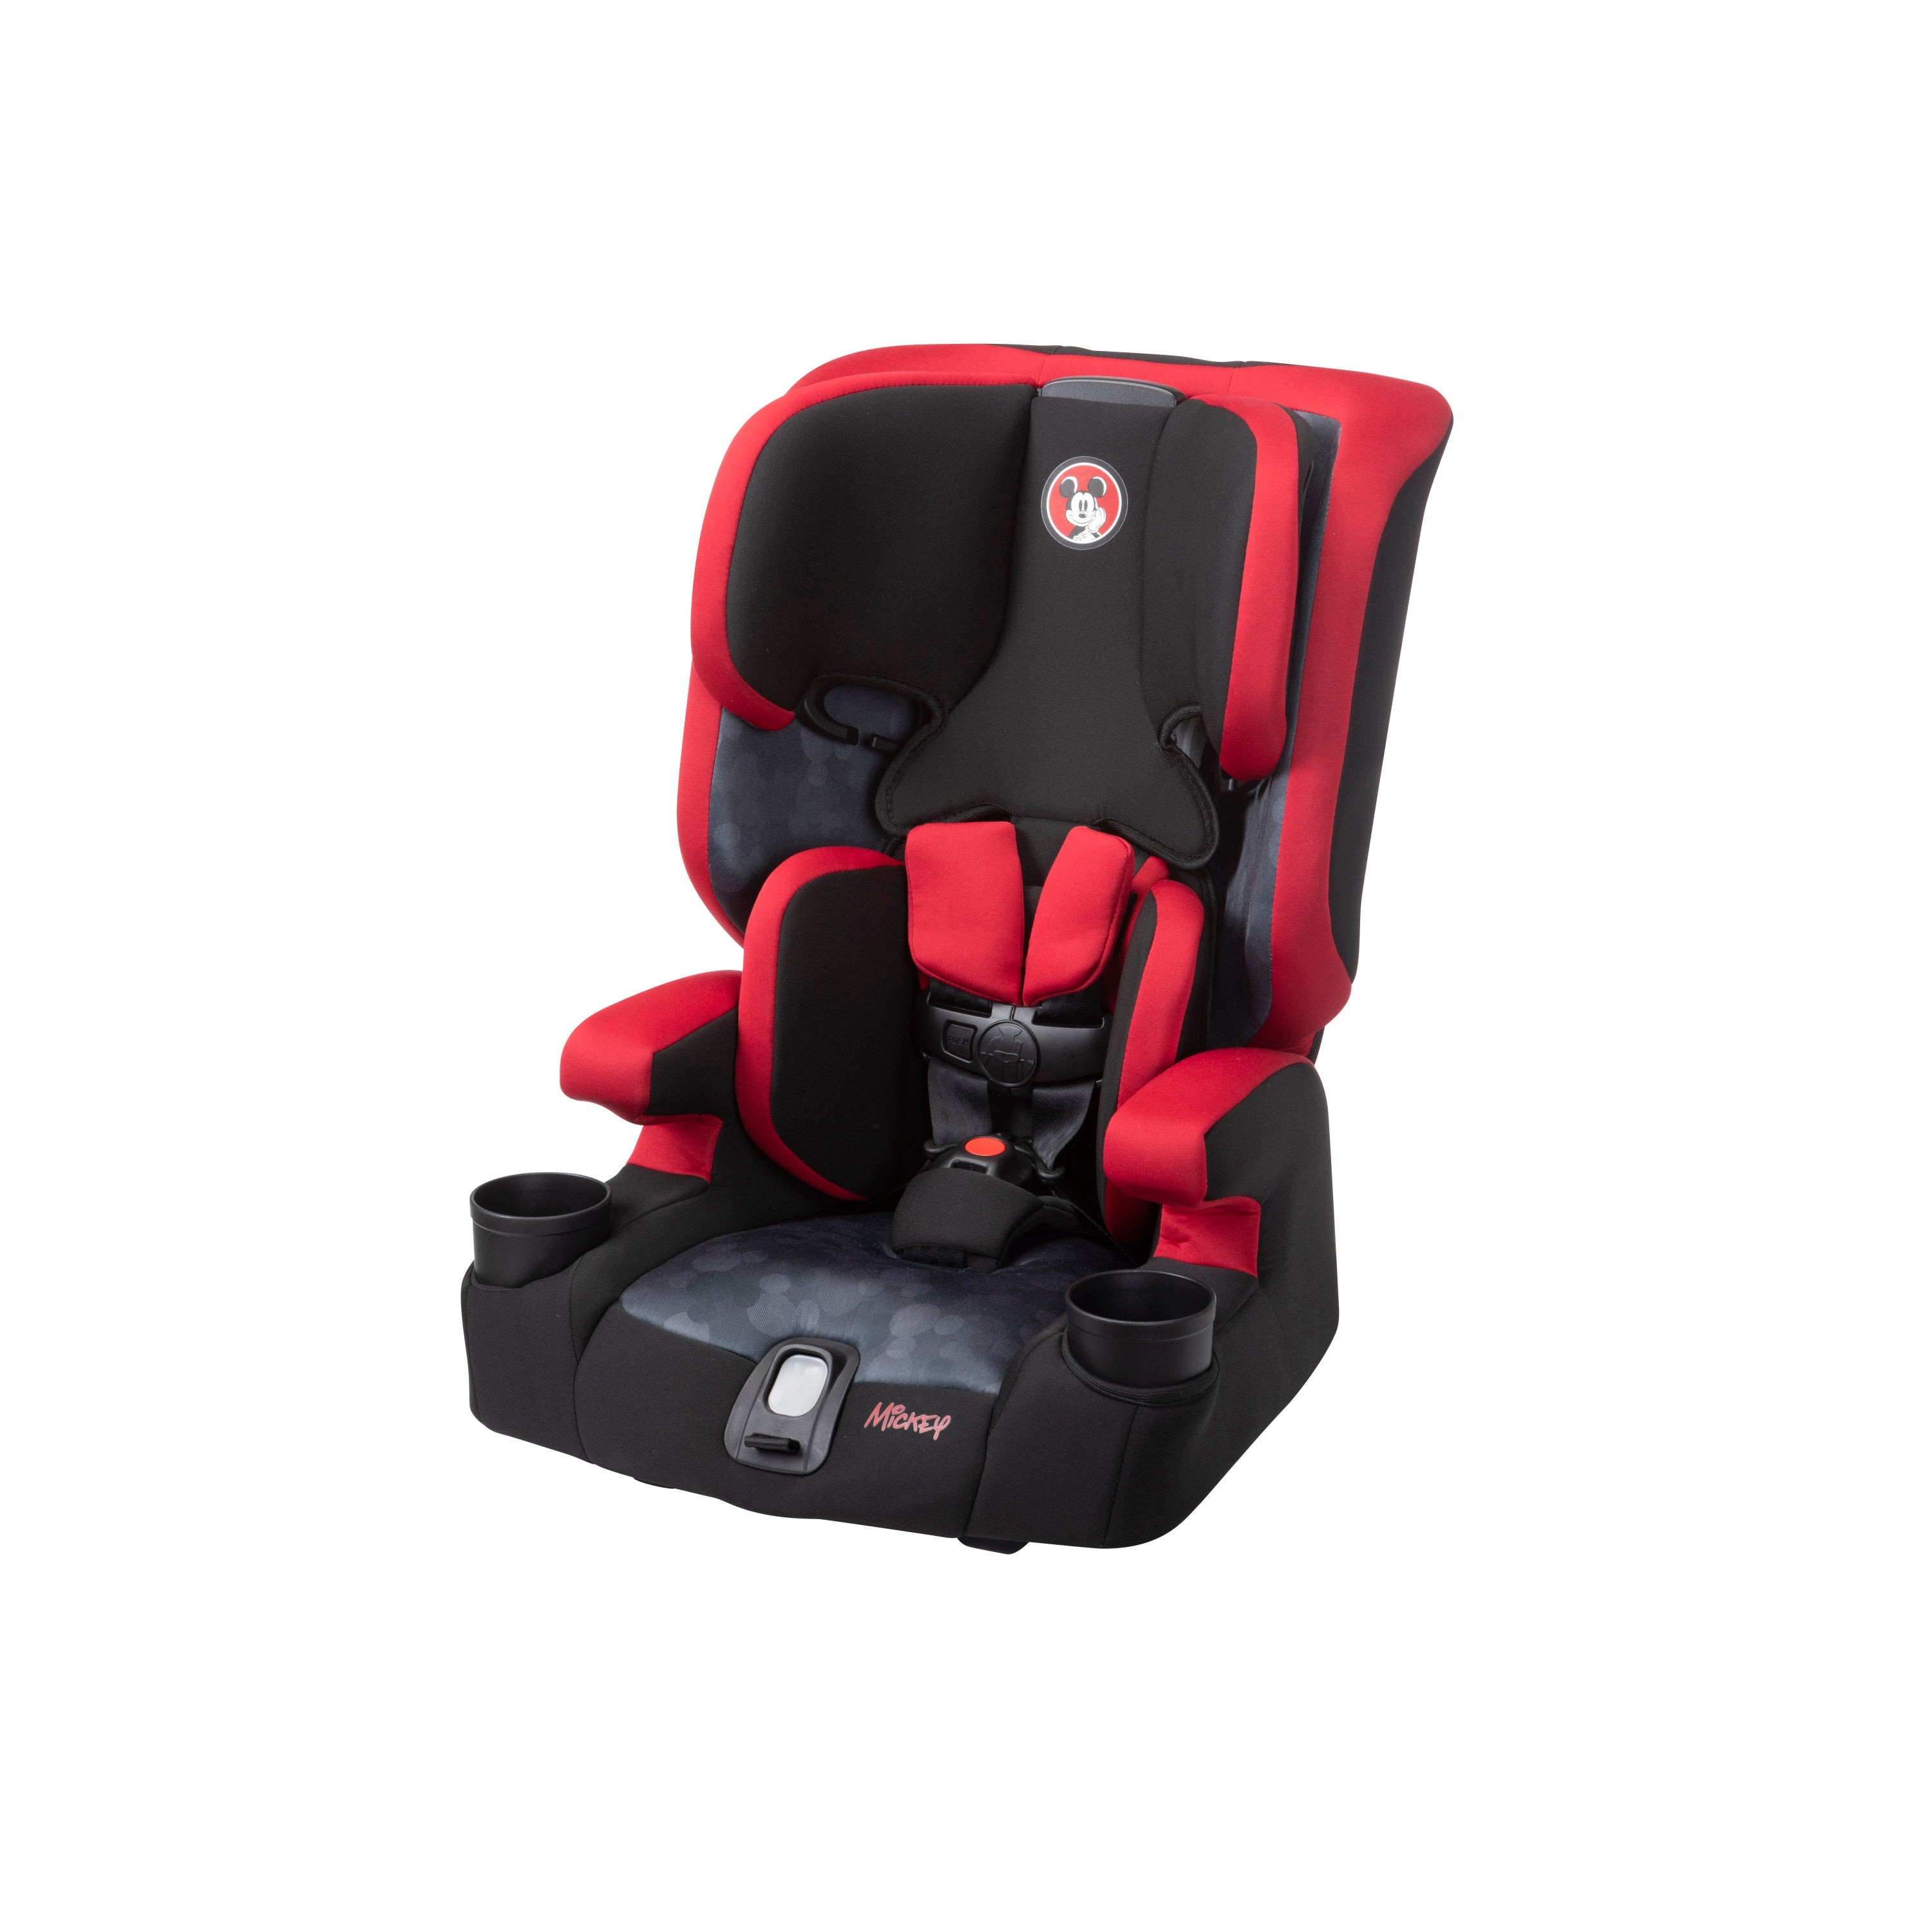 MagicSquad 3-in-1 Harness Booster Car Seat Mickey Blogger